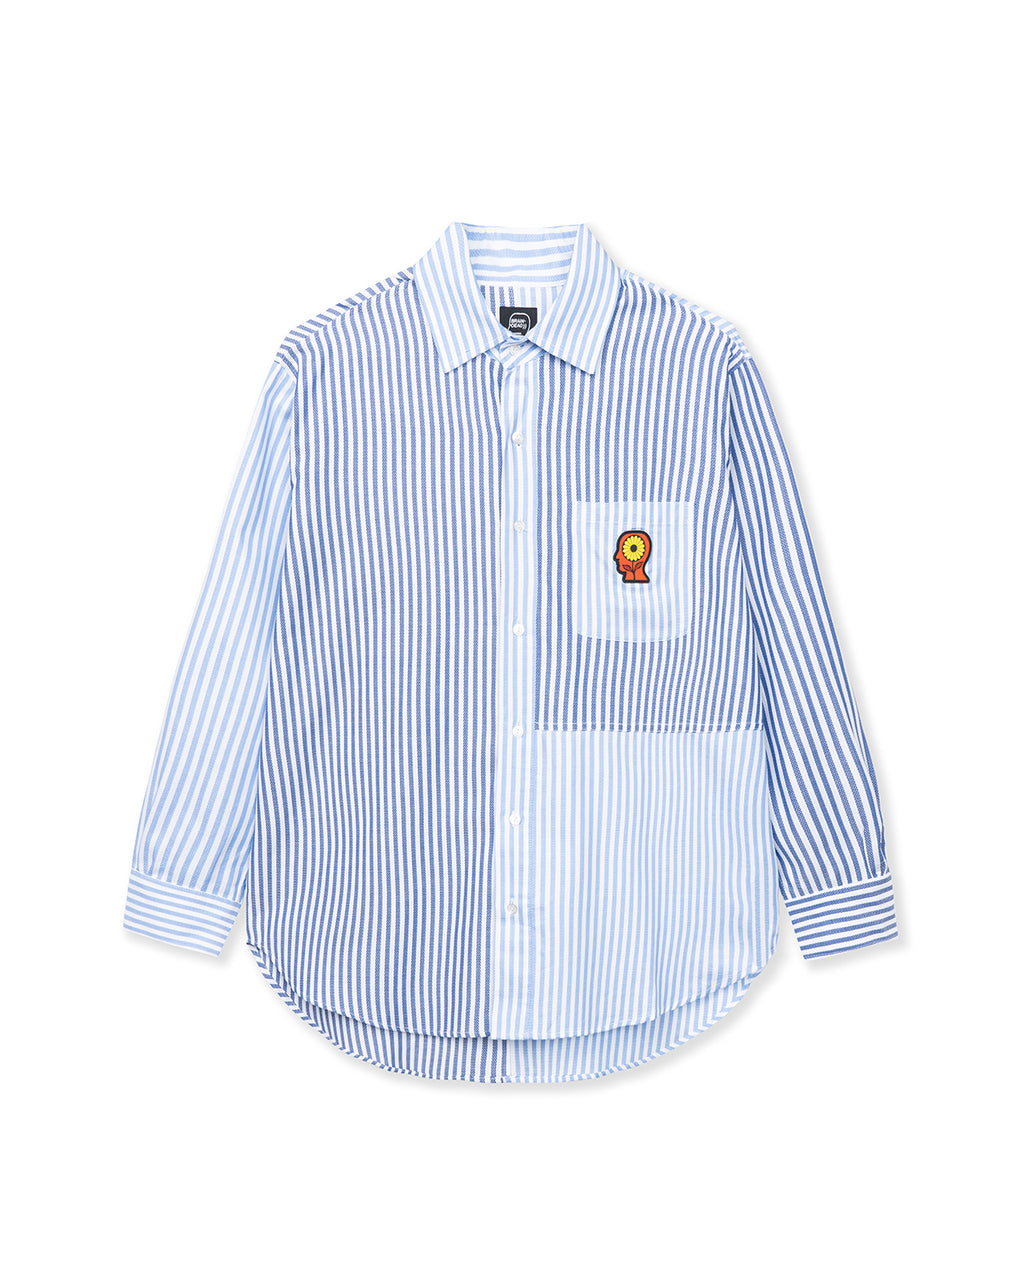 Sunflower Paneled Oxford Button Up Shirting - Blue / white